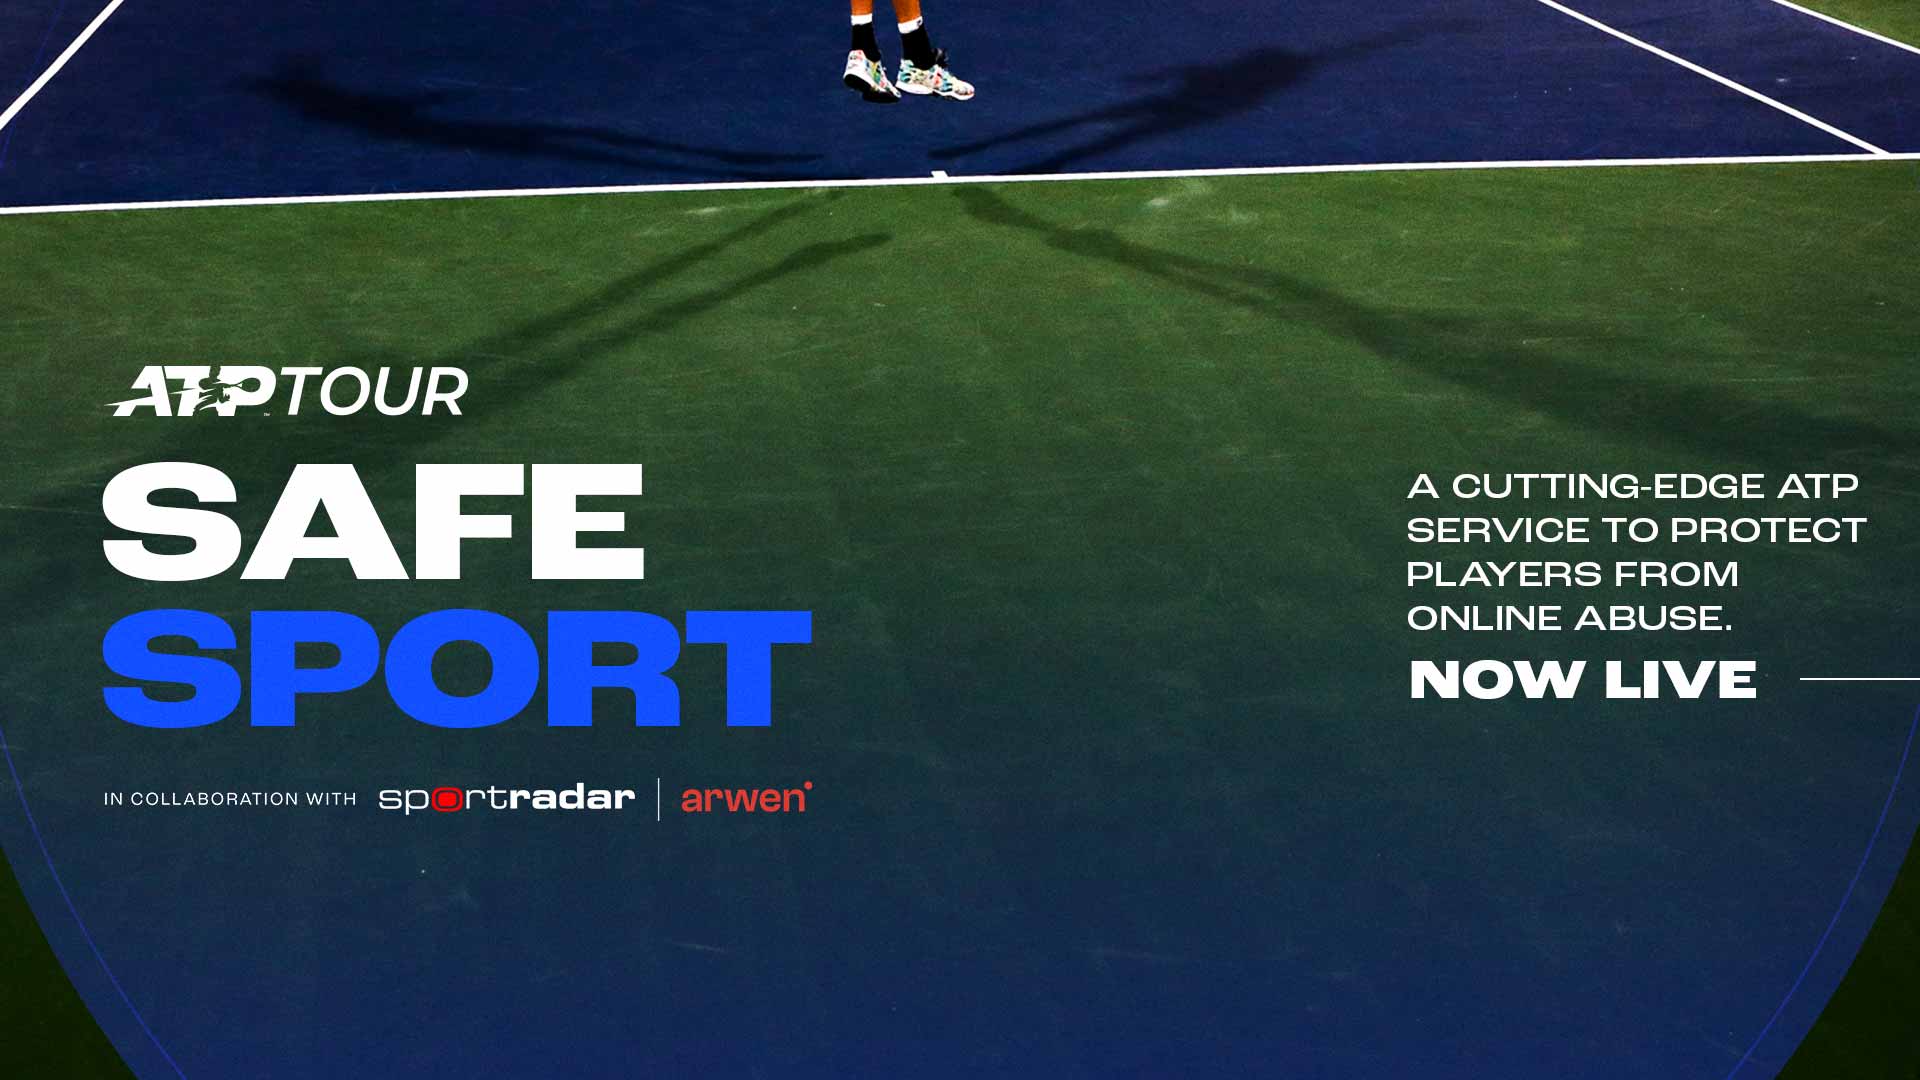 ATP launches cutting edge AI-powered service to protect players from online abuse